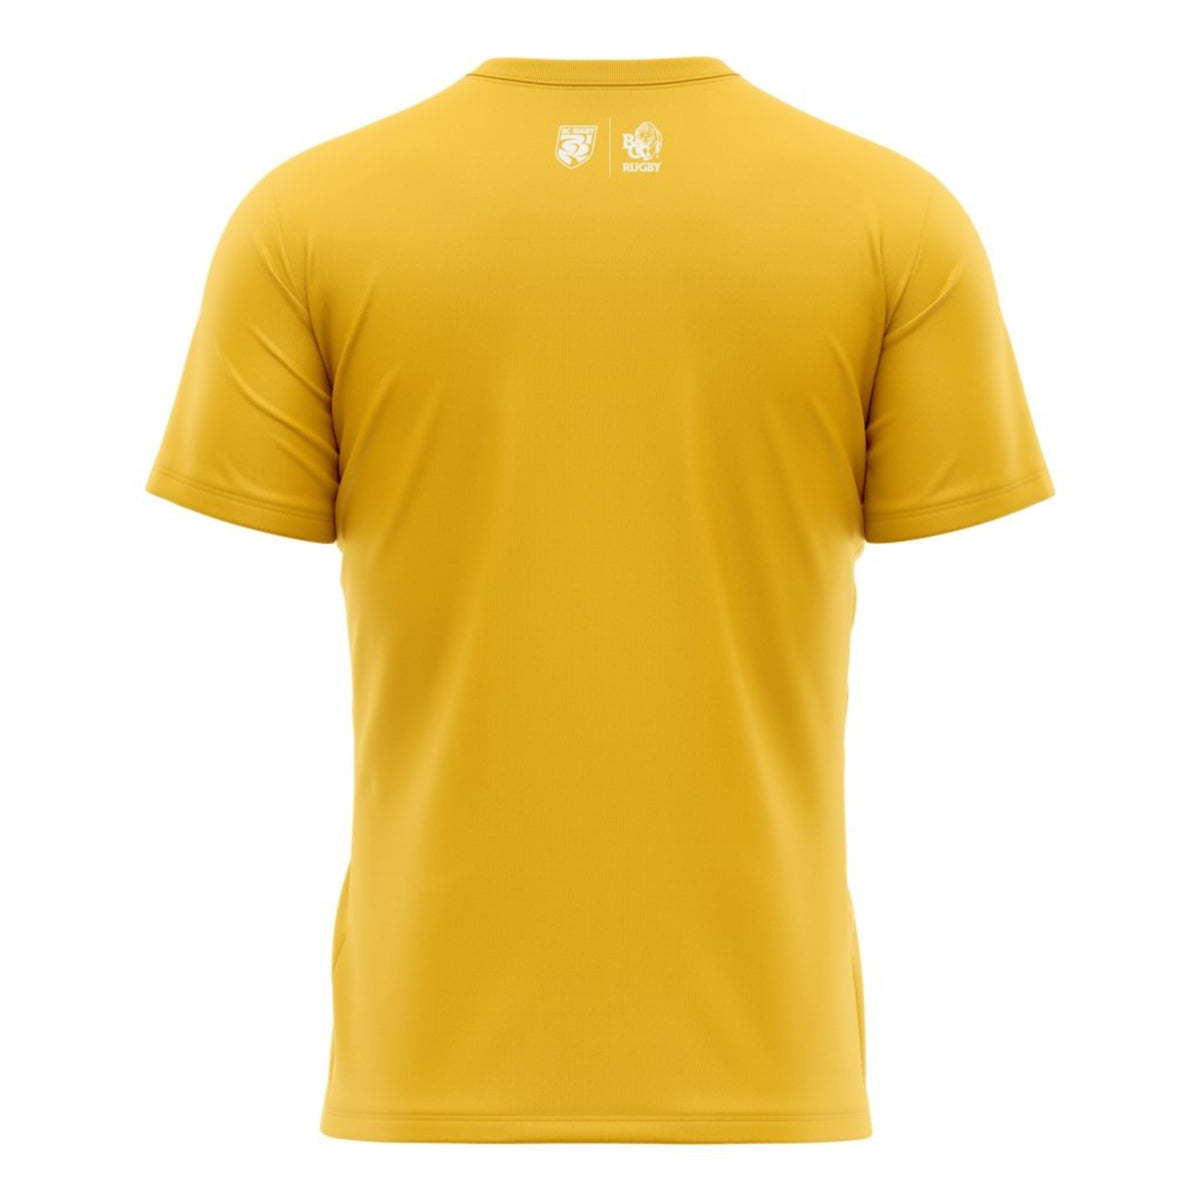 BC Rugby 2021 &quot;Icon&quot; Tee - Men&#39;s Navy/Grey/White/Gold - www.therugbyshop.com www.therugbyshop.com XIX Brands TEES BC Rugby 2021 &quot;Icon&quot; Tee - Men&#39;s Navy/Grey/White/Gold